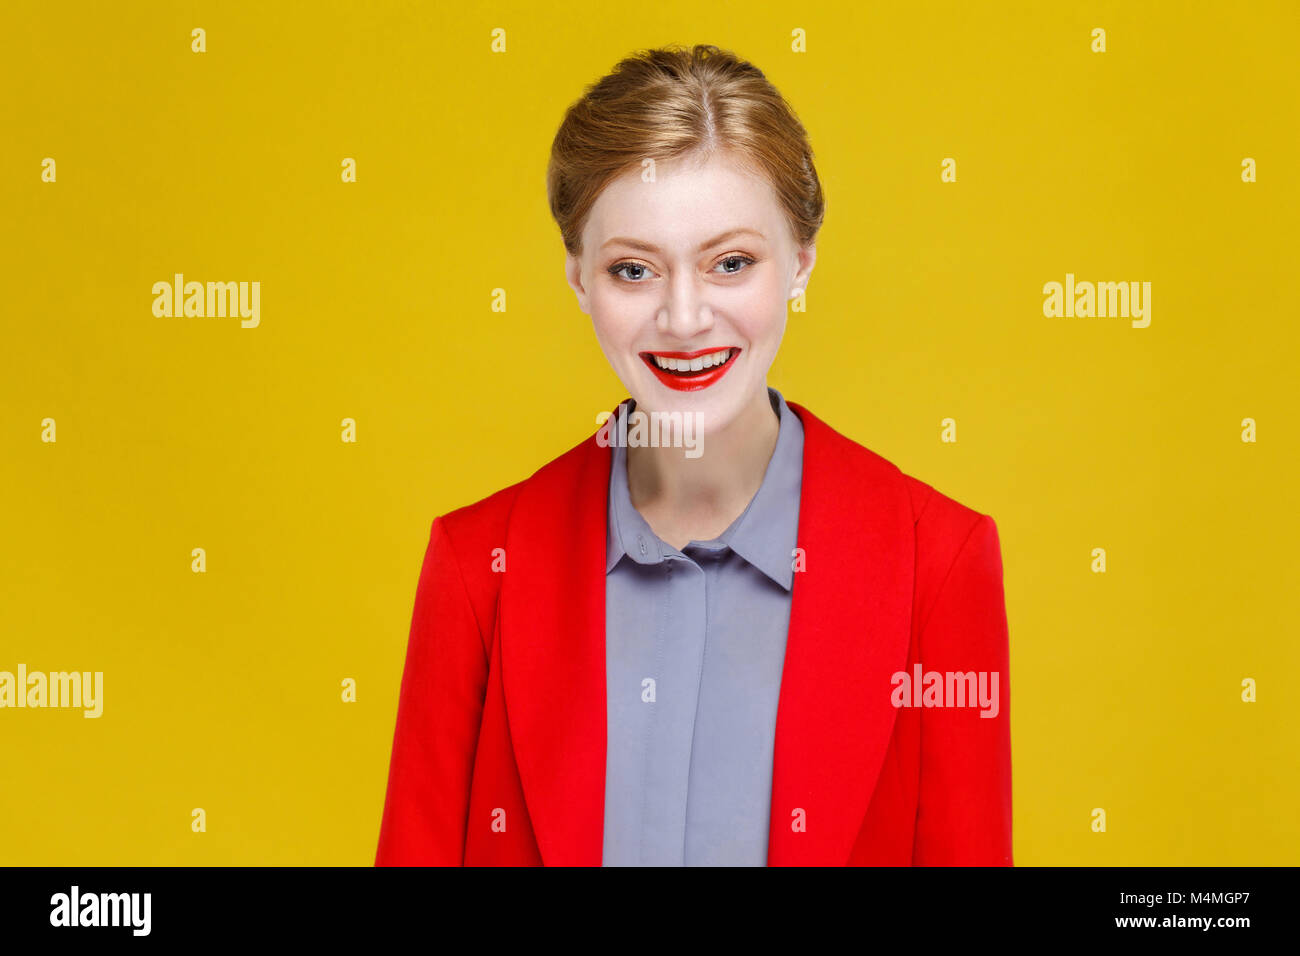 Ginger red head model in red suit toothy smile. Studio shot, isolated on yellow background Stock Photo